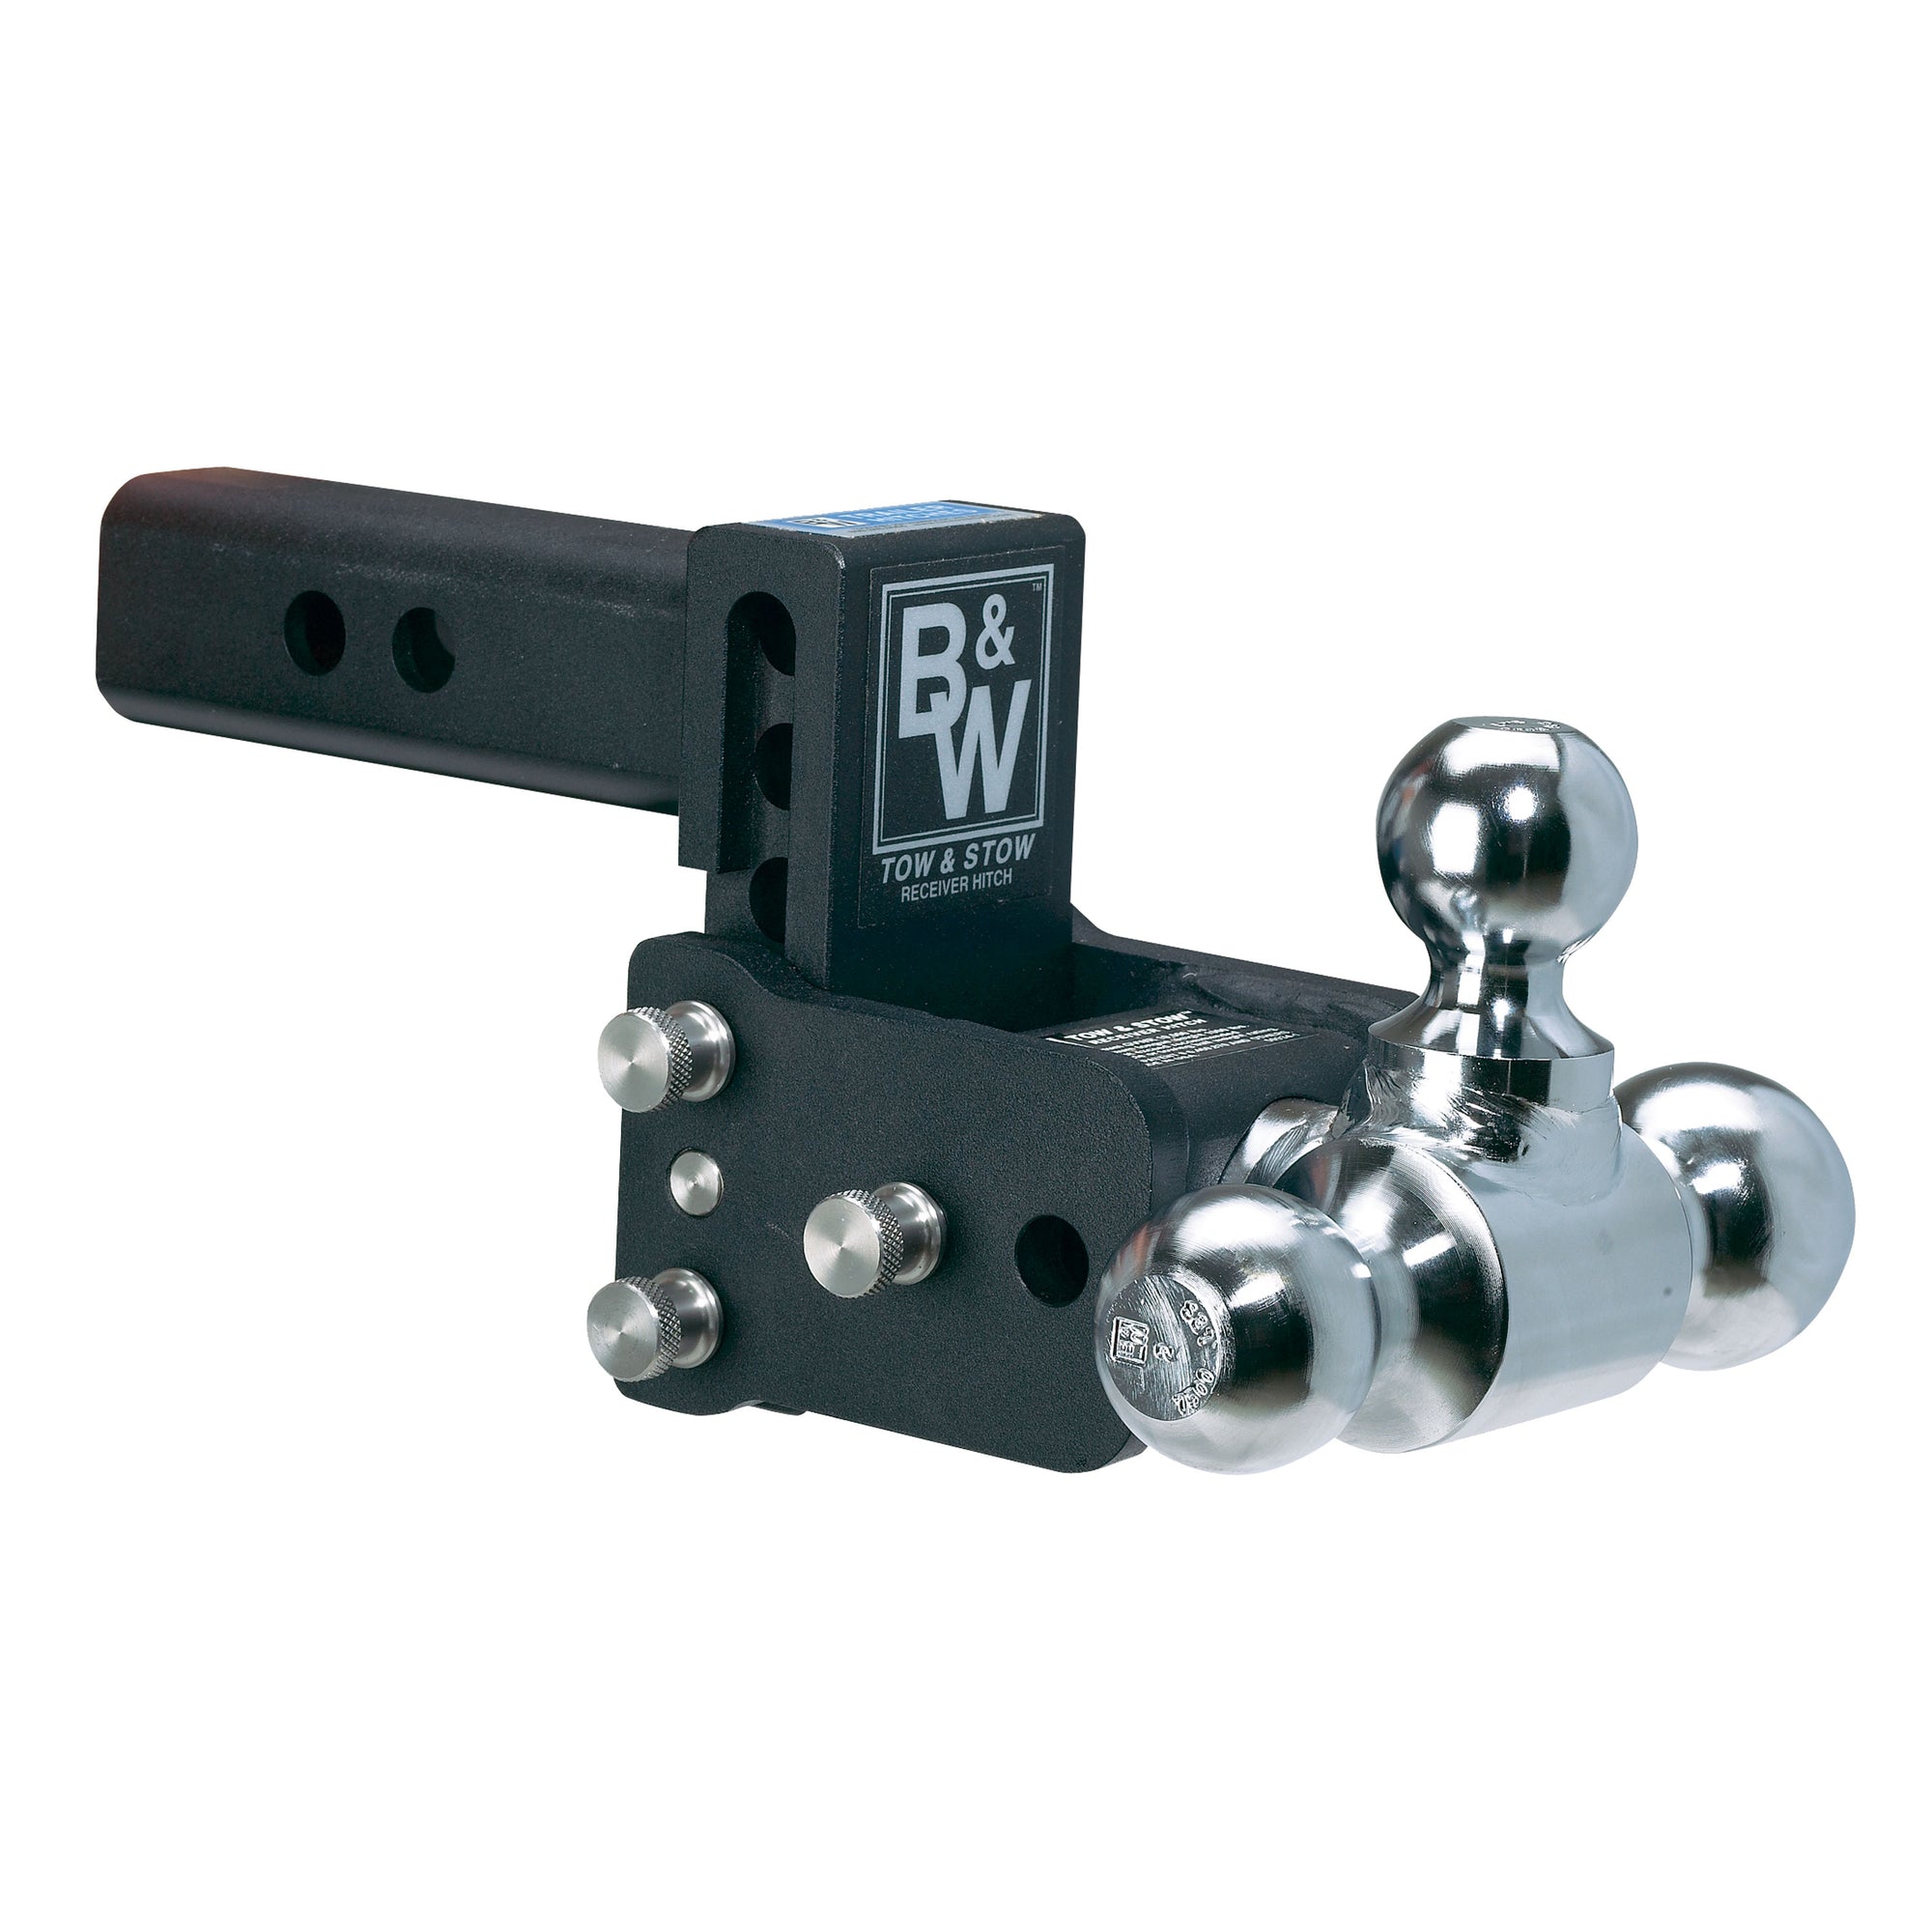 B&W Trailer Hitches TS10048B Tow and Stow Adjustable Ball Mount - 1-7/8", 2" & 2-5/16" Ball, 5" Drop, 5.5" Rise, Black